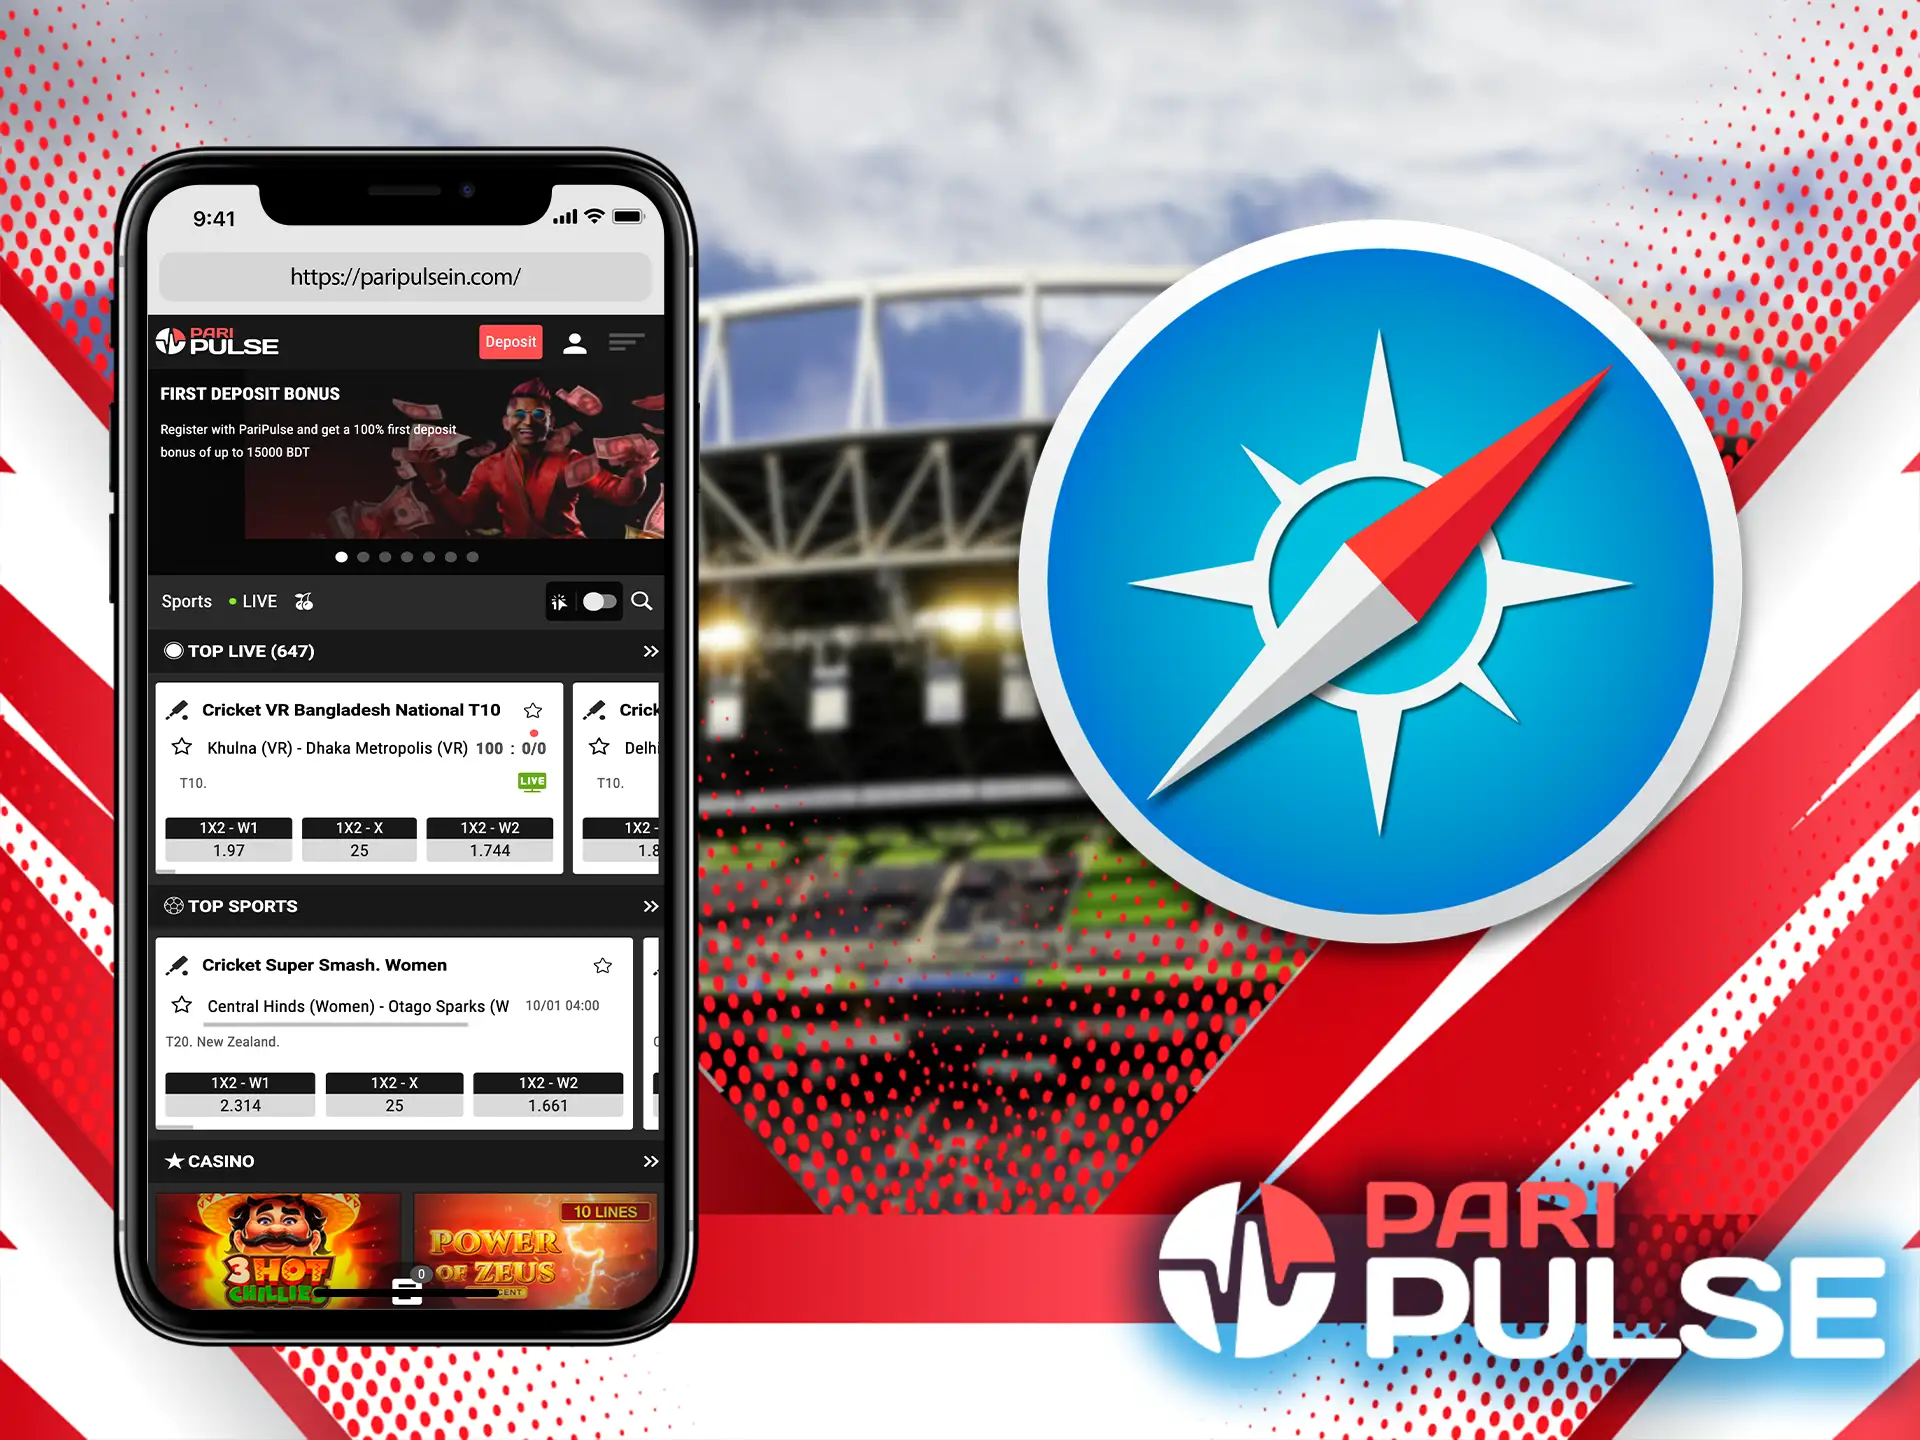 If your smartphone is not compatible with the application - this option from PariPulse will help you enjoy the game.